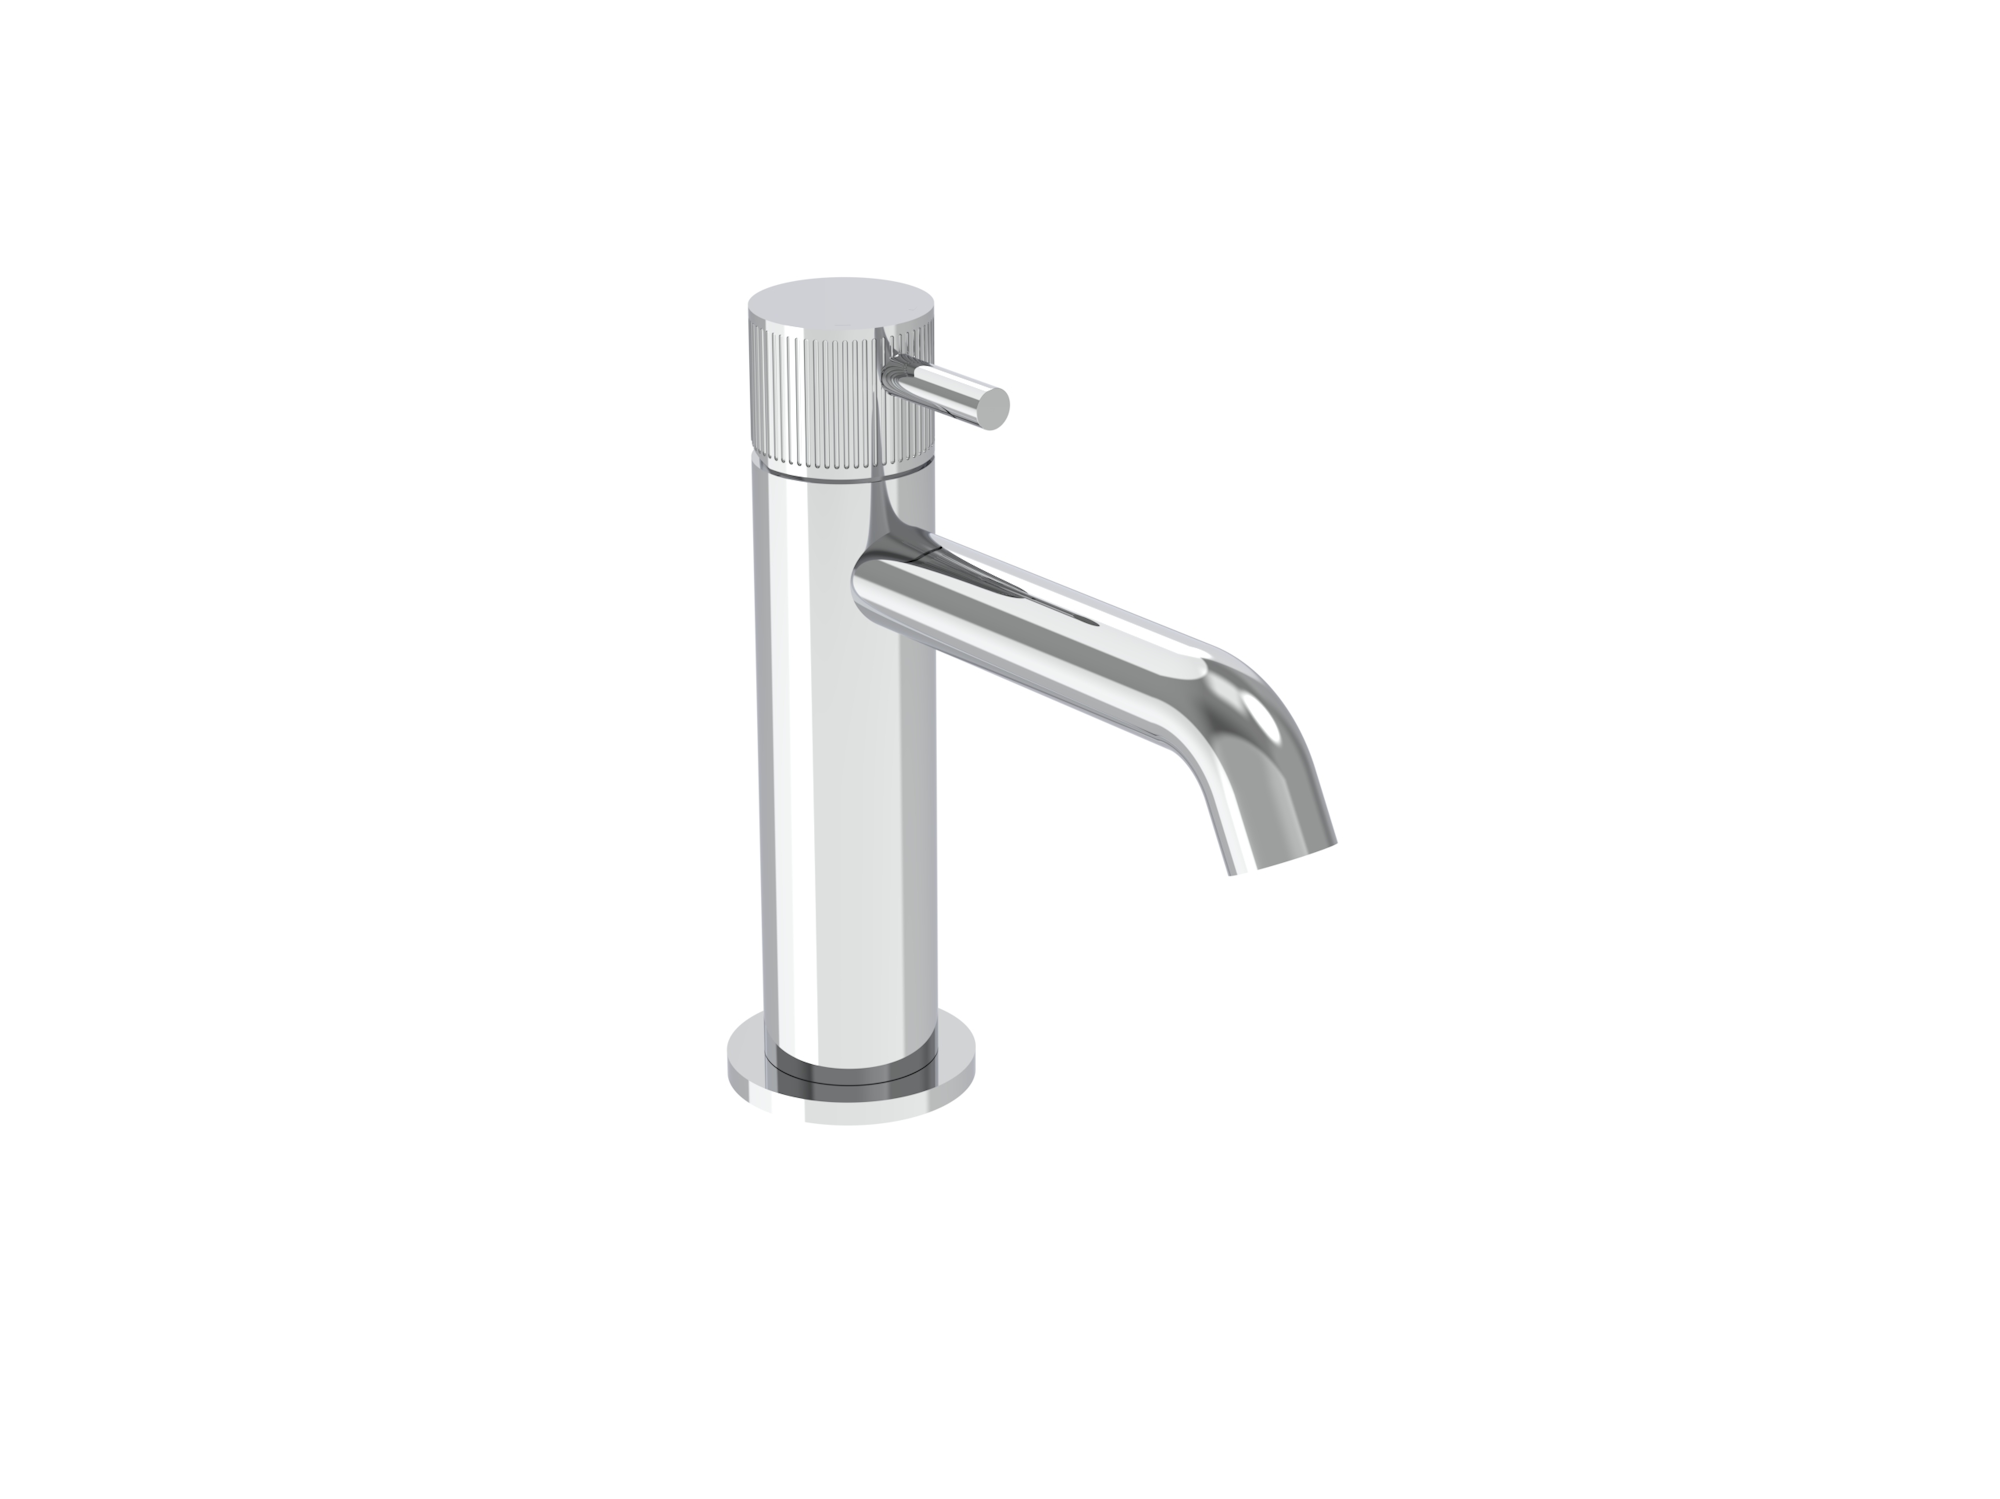 COS Basin mixer KIT - w/ Fluted handle - Chrome